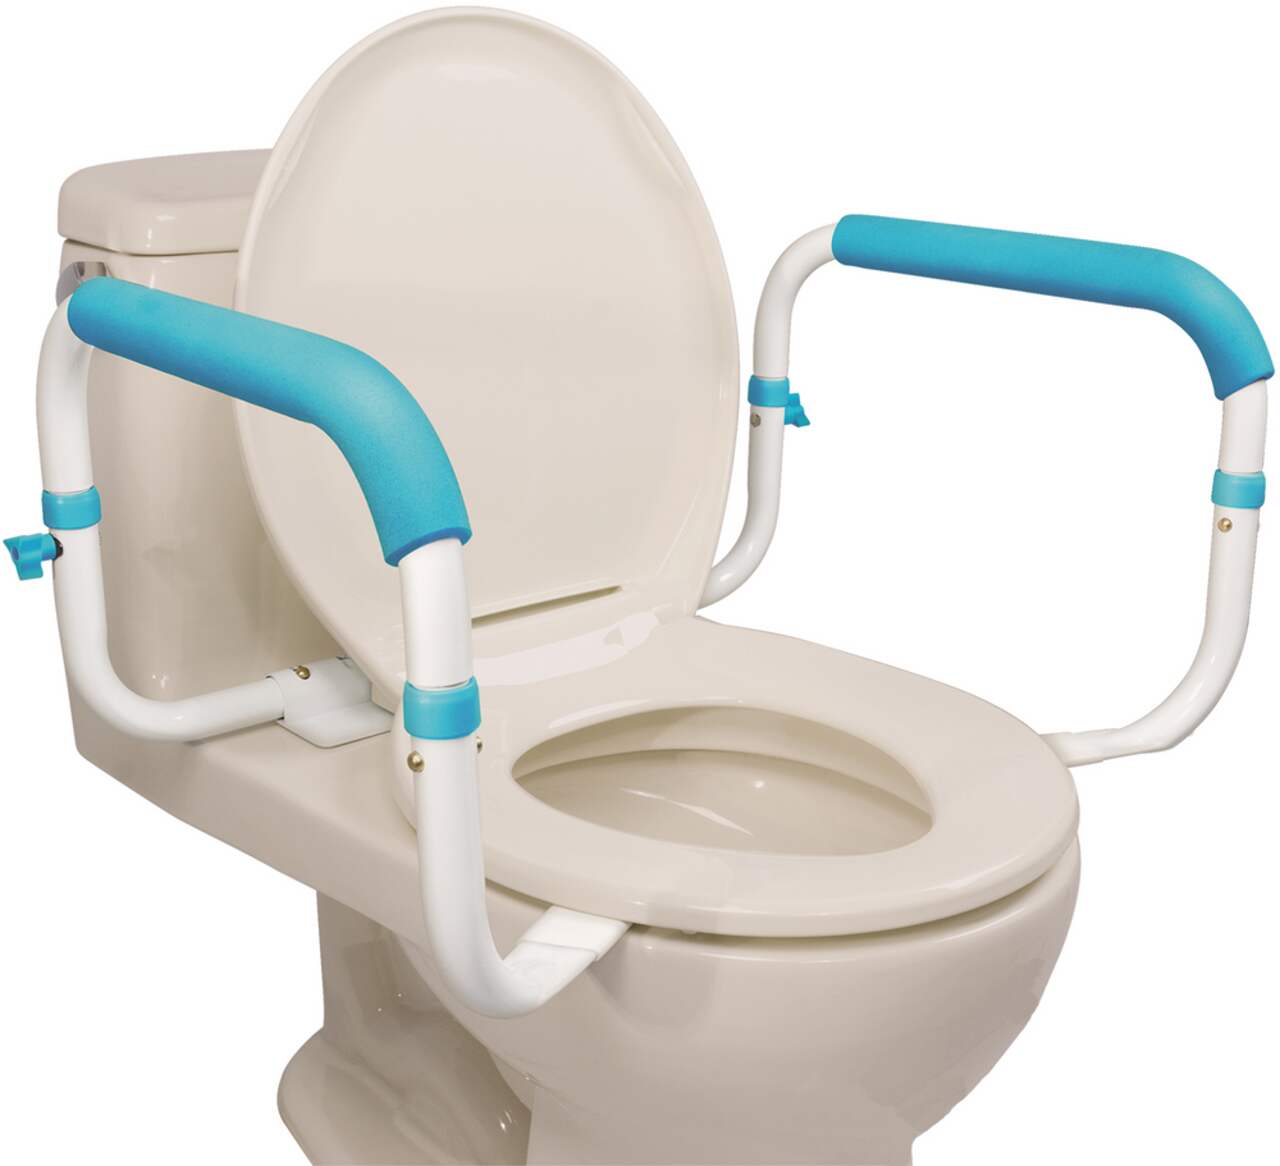 https://media-www.canadiantire.ca/product/living/personal-garment-care/personal-care/0439183/aquasense-toilet-safety-rail--6bf3e11b-1e4e-4999-96cf-ddf1ebce7f2c.png?imdensity=1&imwidth=640&impolicy=mZoom